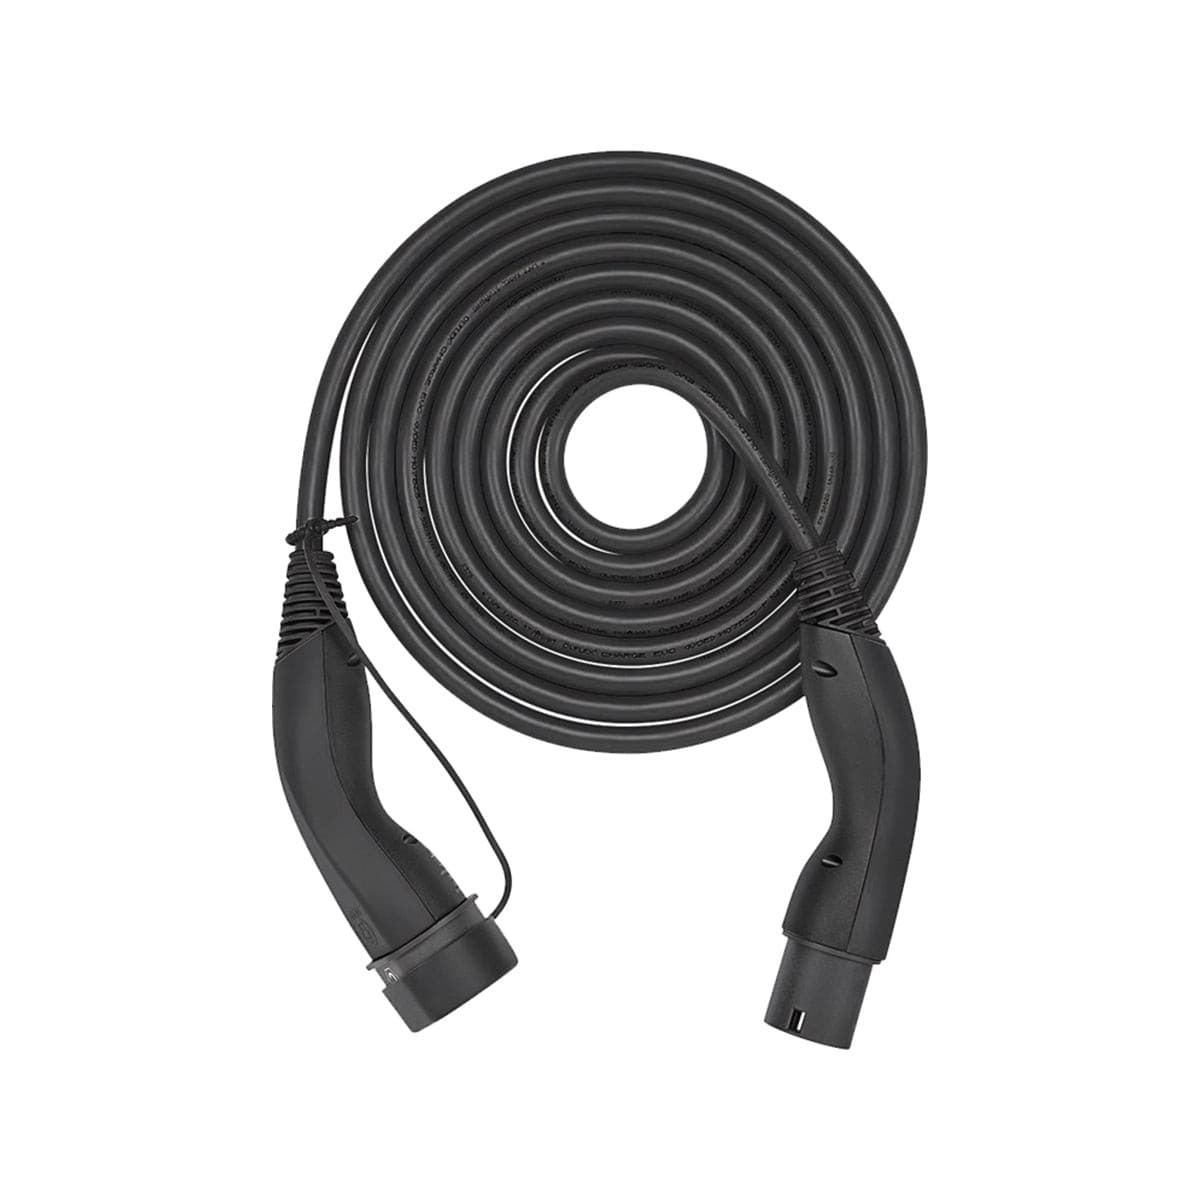 LAPP EV Helix Charge Cable Type 2 (22kW-3P-32A) 5m for Hybrid and Electric Cars - Black.